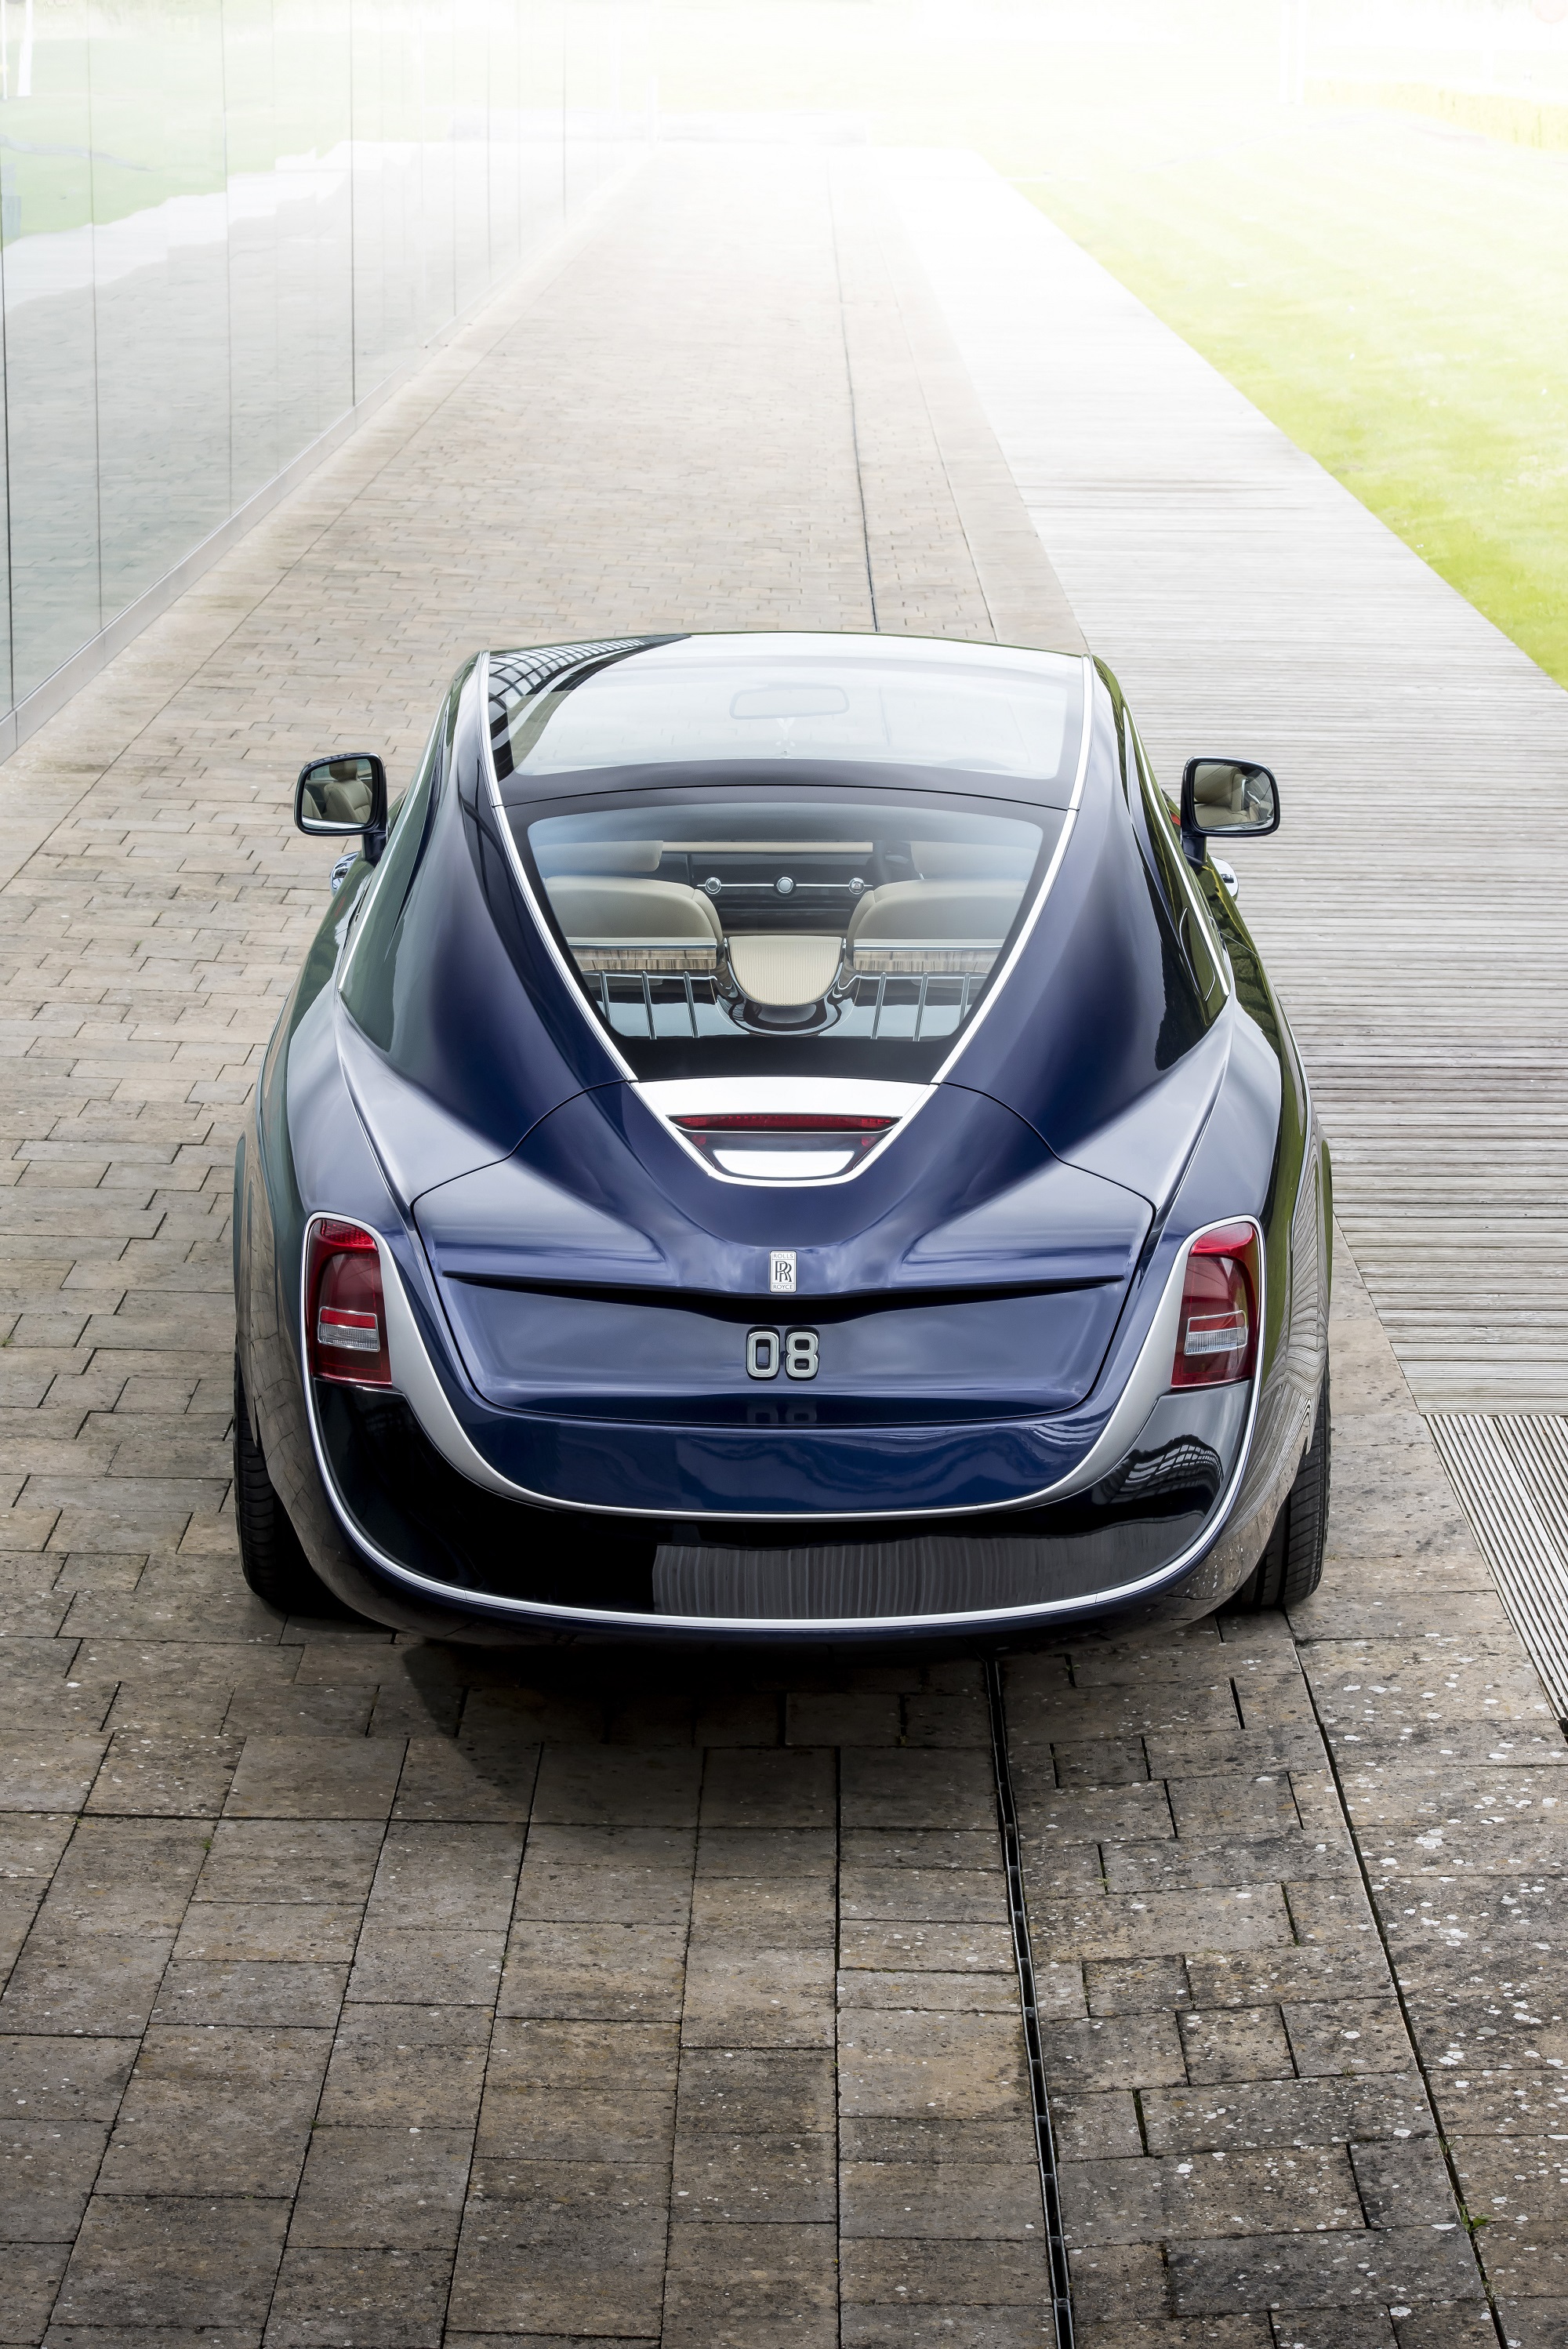 Rolls-Royce Sweptail Is a One-Off, Throwback Beauty